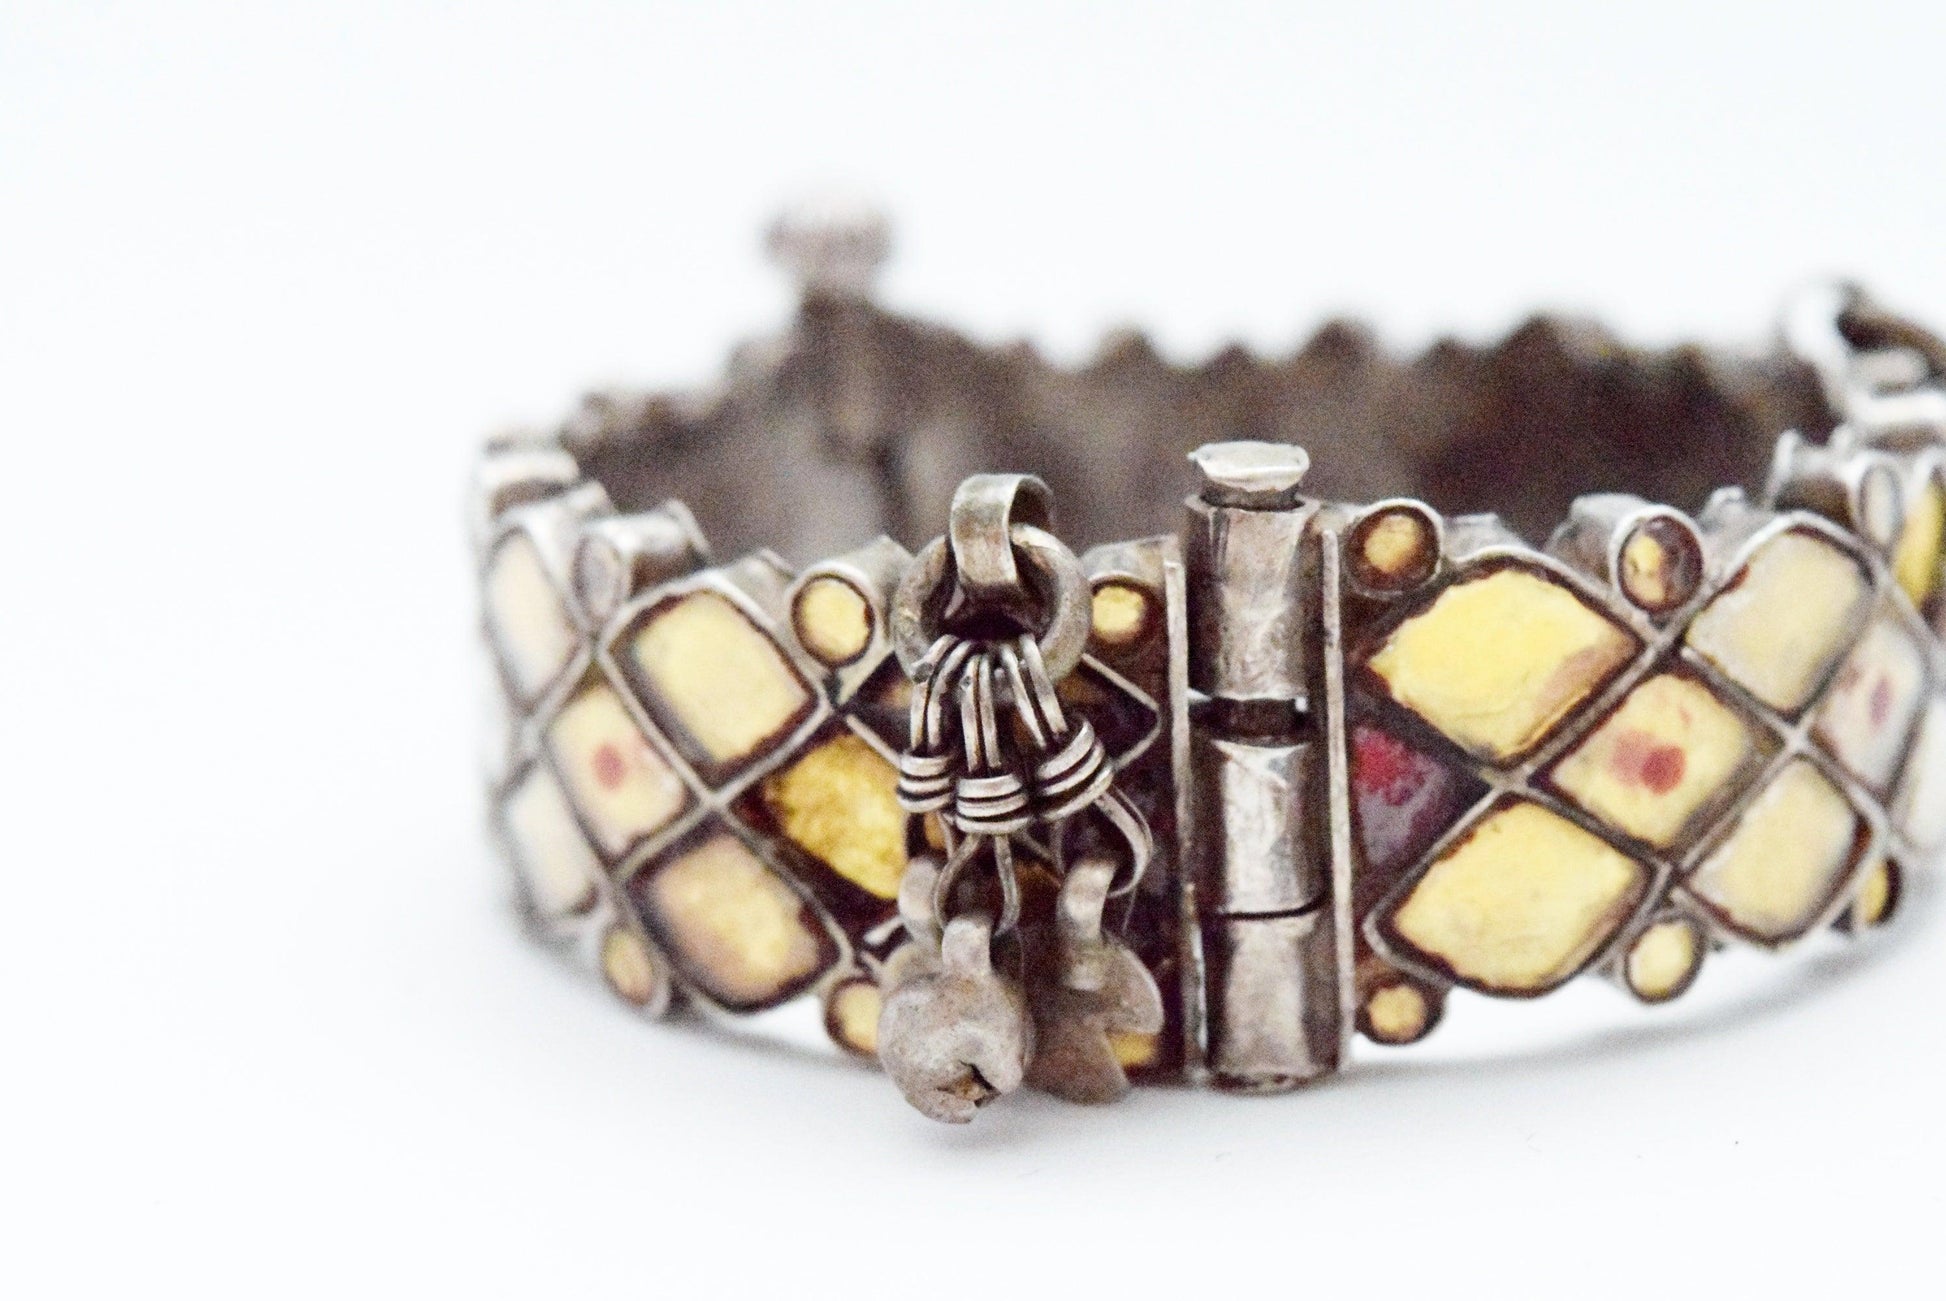 Vintage Silver Indian Bangle with Yellow Glass Insets - Anteeka